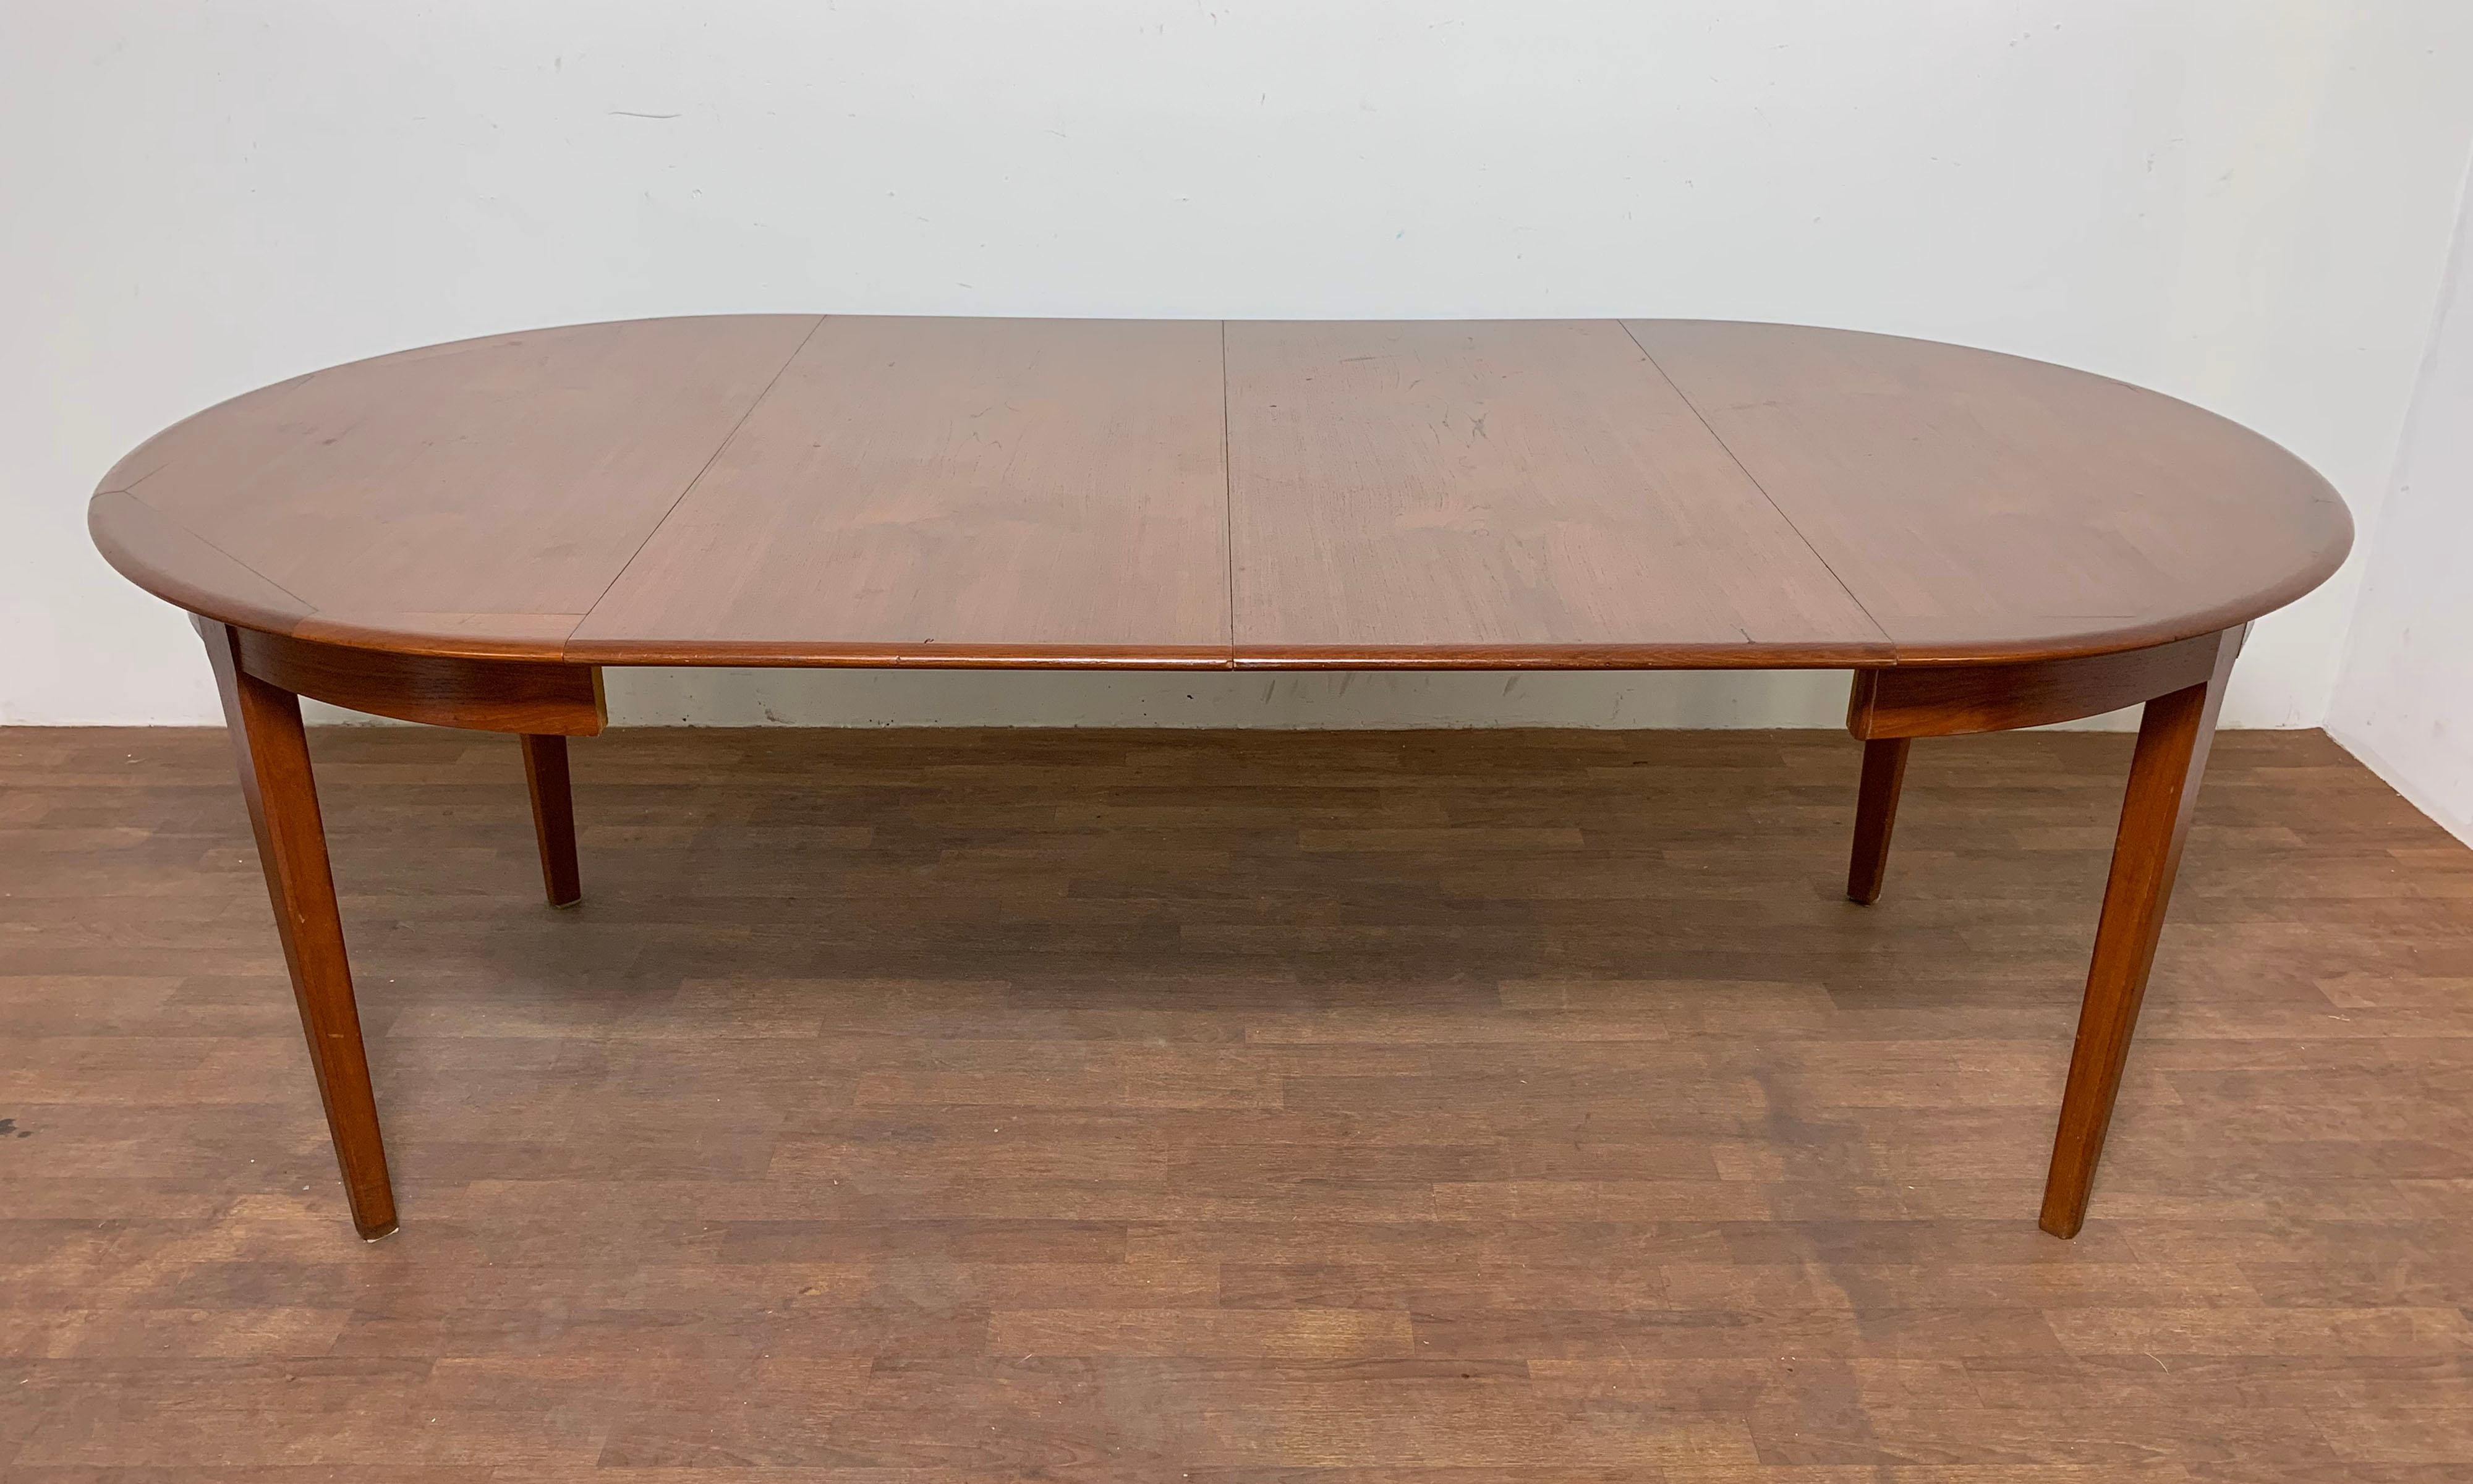 Swedish Danish Modern Round Teak Dining Table with Two Leaves, Circa 1960s